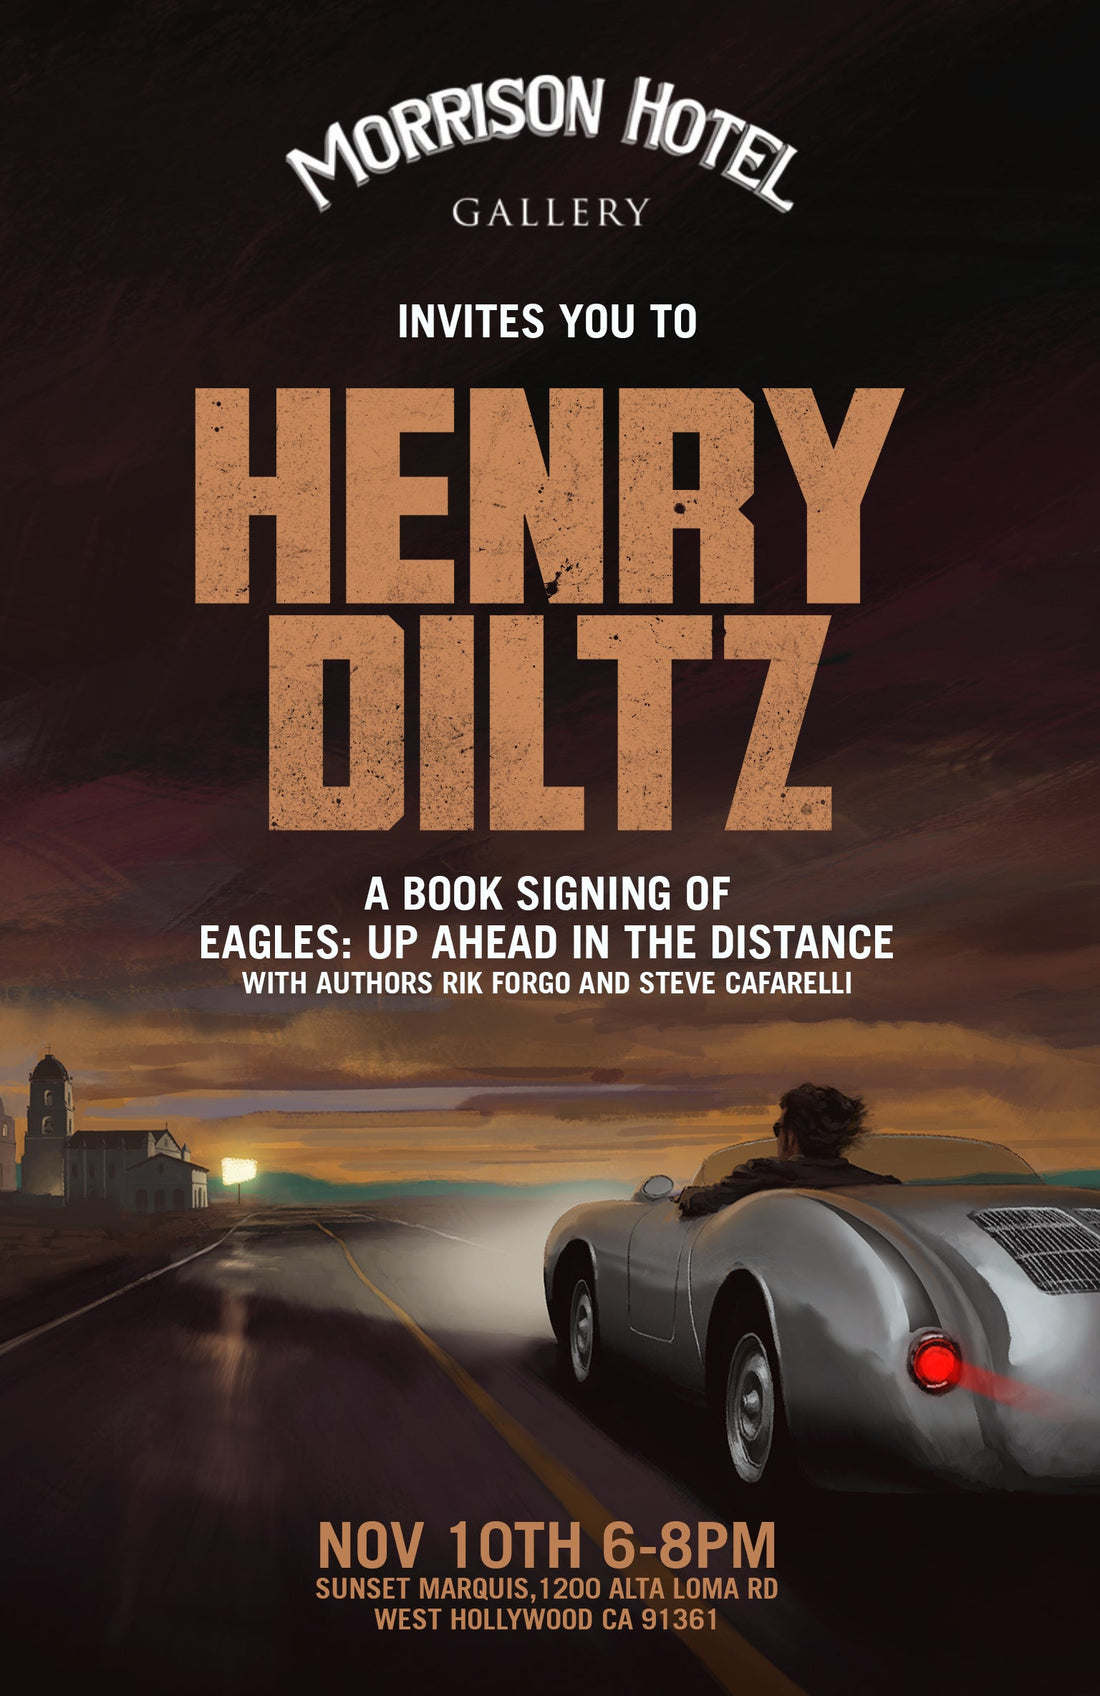 Eagles: Up Ahead in the Distance | Book Signing with Henry Diltz - Morrison Hotel Gallery